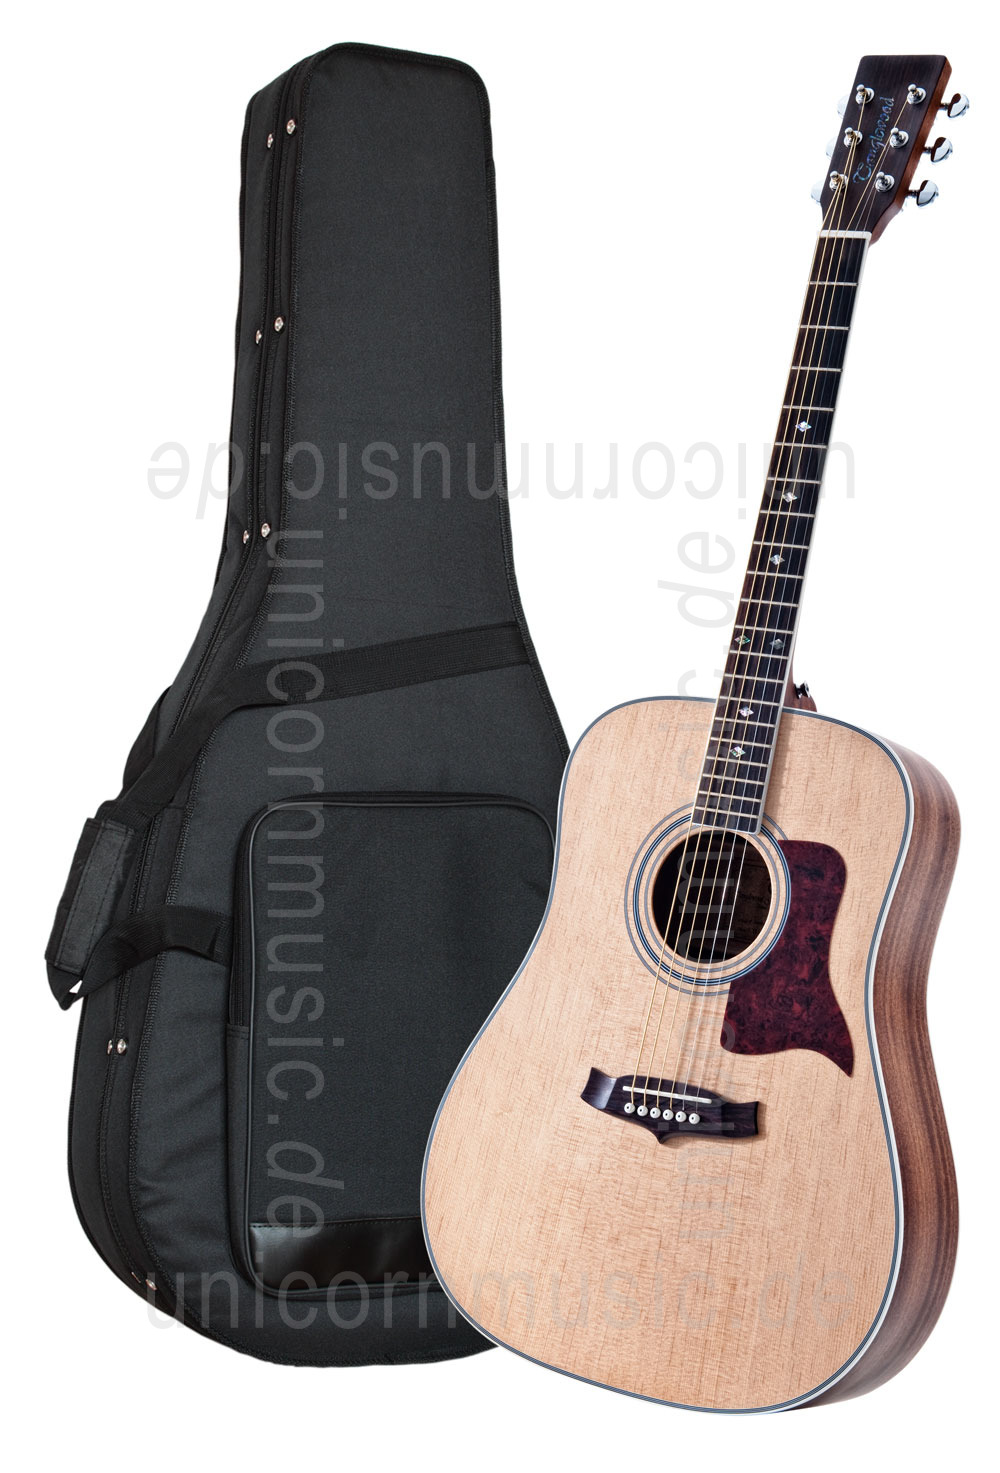 to article description / price Acoustic Guitar TANGLEWOOD TW15-NS-PRO SPEC WIDE NECK - Sundance Series - Dreadnought - all solid